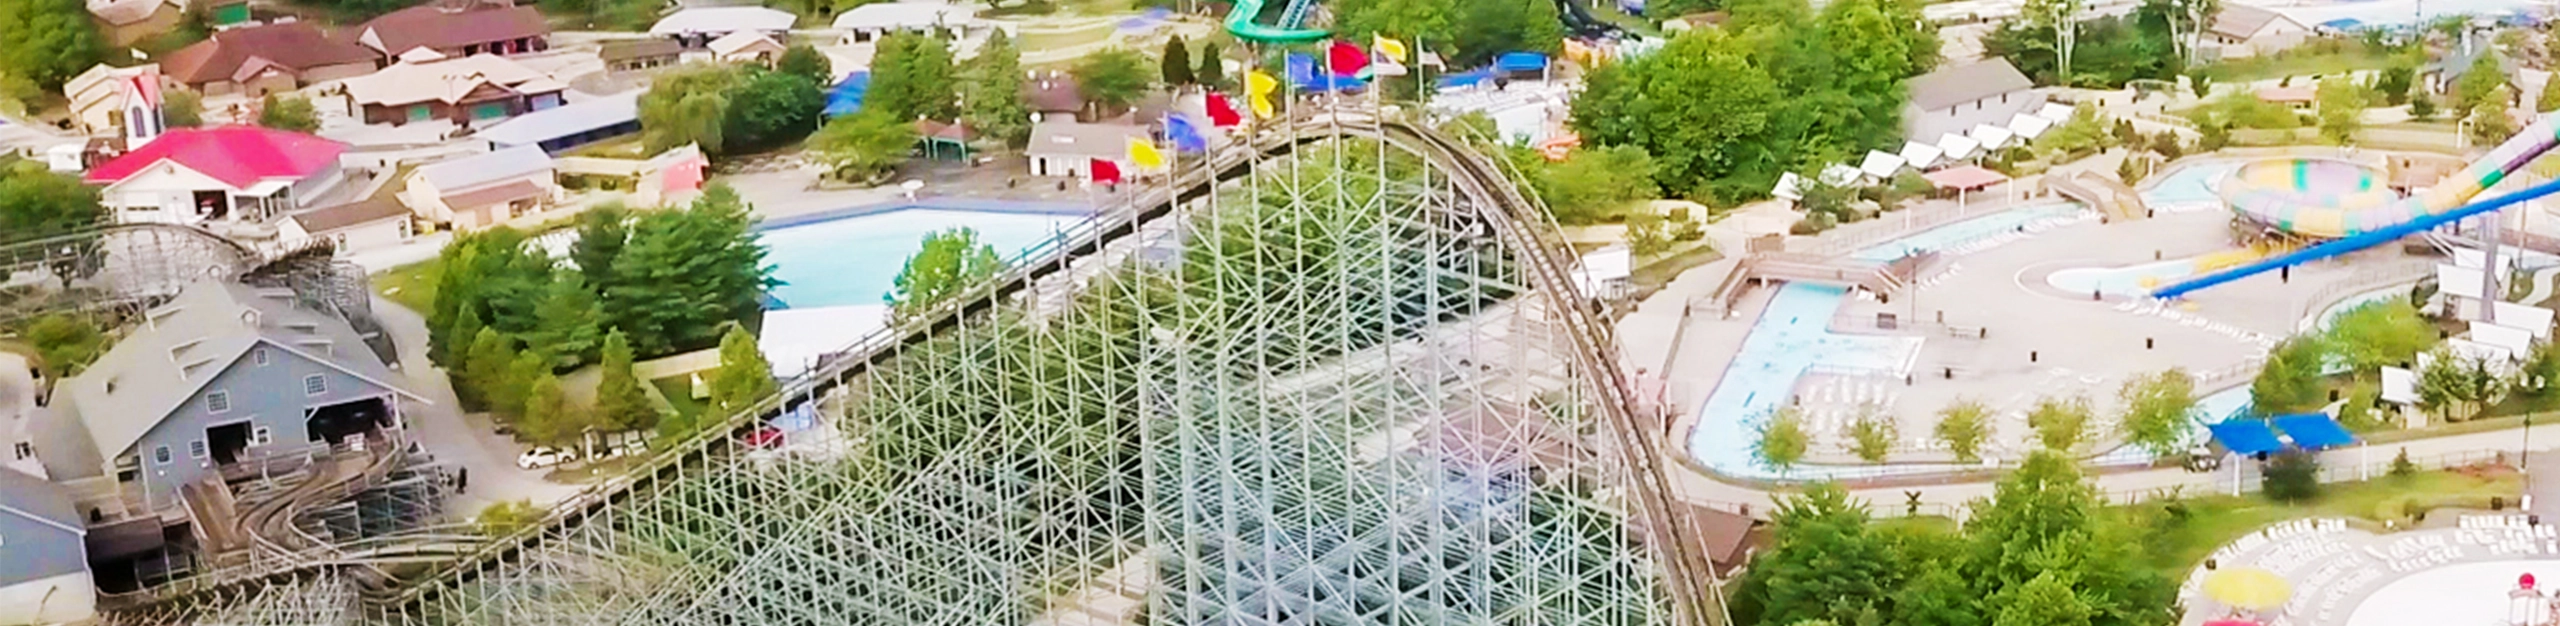 Aerial photo of The Voyage Wooden Roller Coaster's lift hill with water attractions in the background at Holiday World & Splashin' Safari in Santa Claus, Indiana